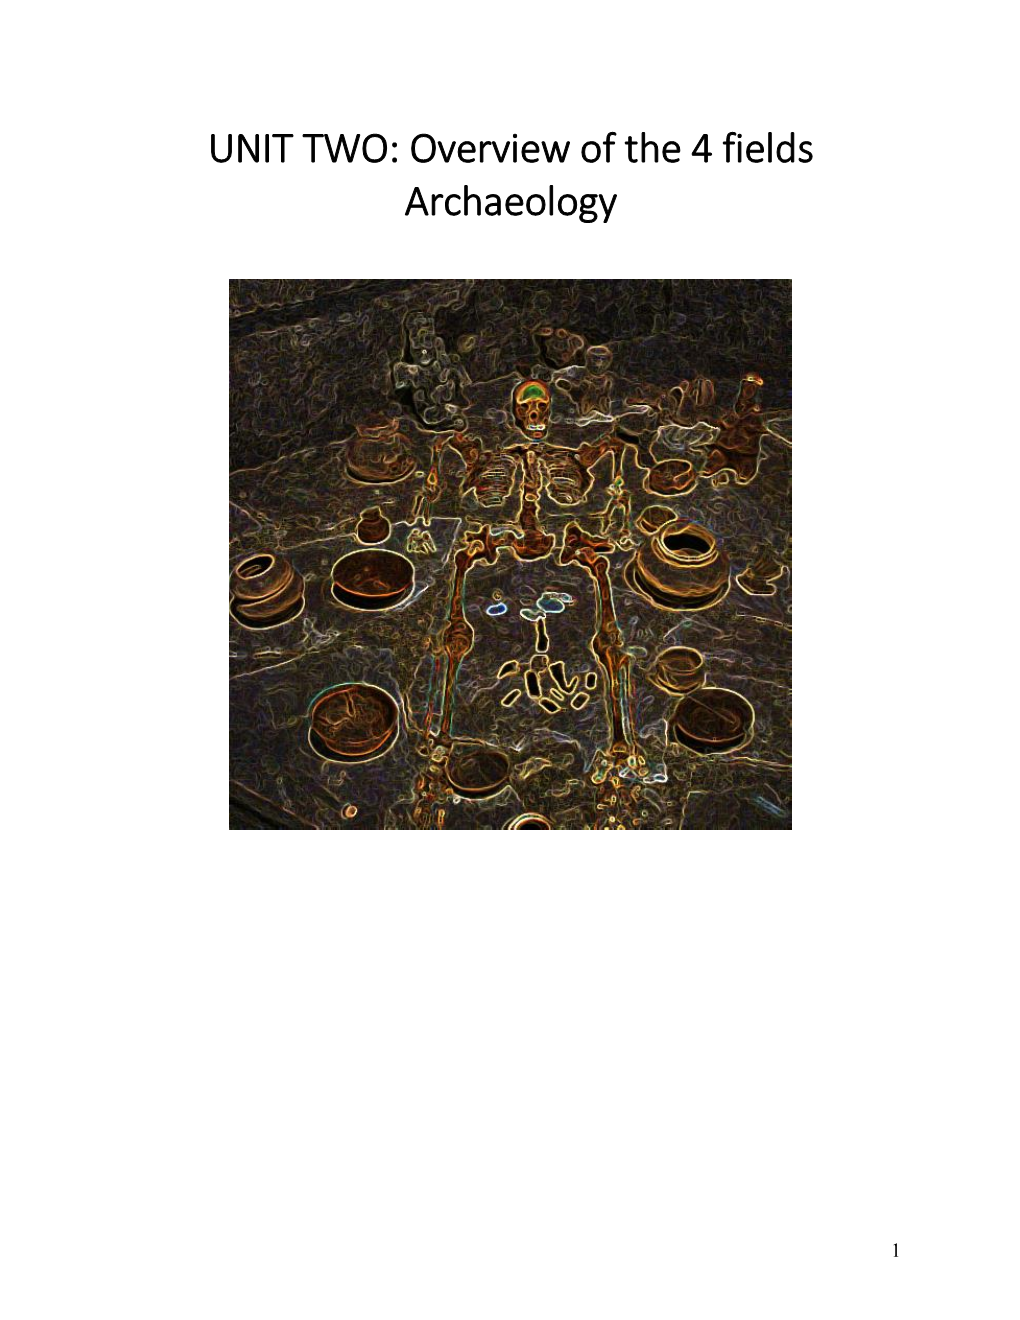 UNIT TWO: Overview of the 4 Fields Archaeology